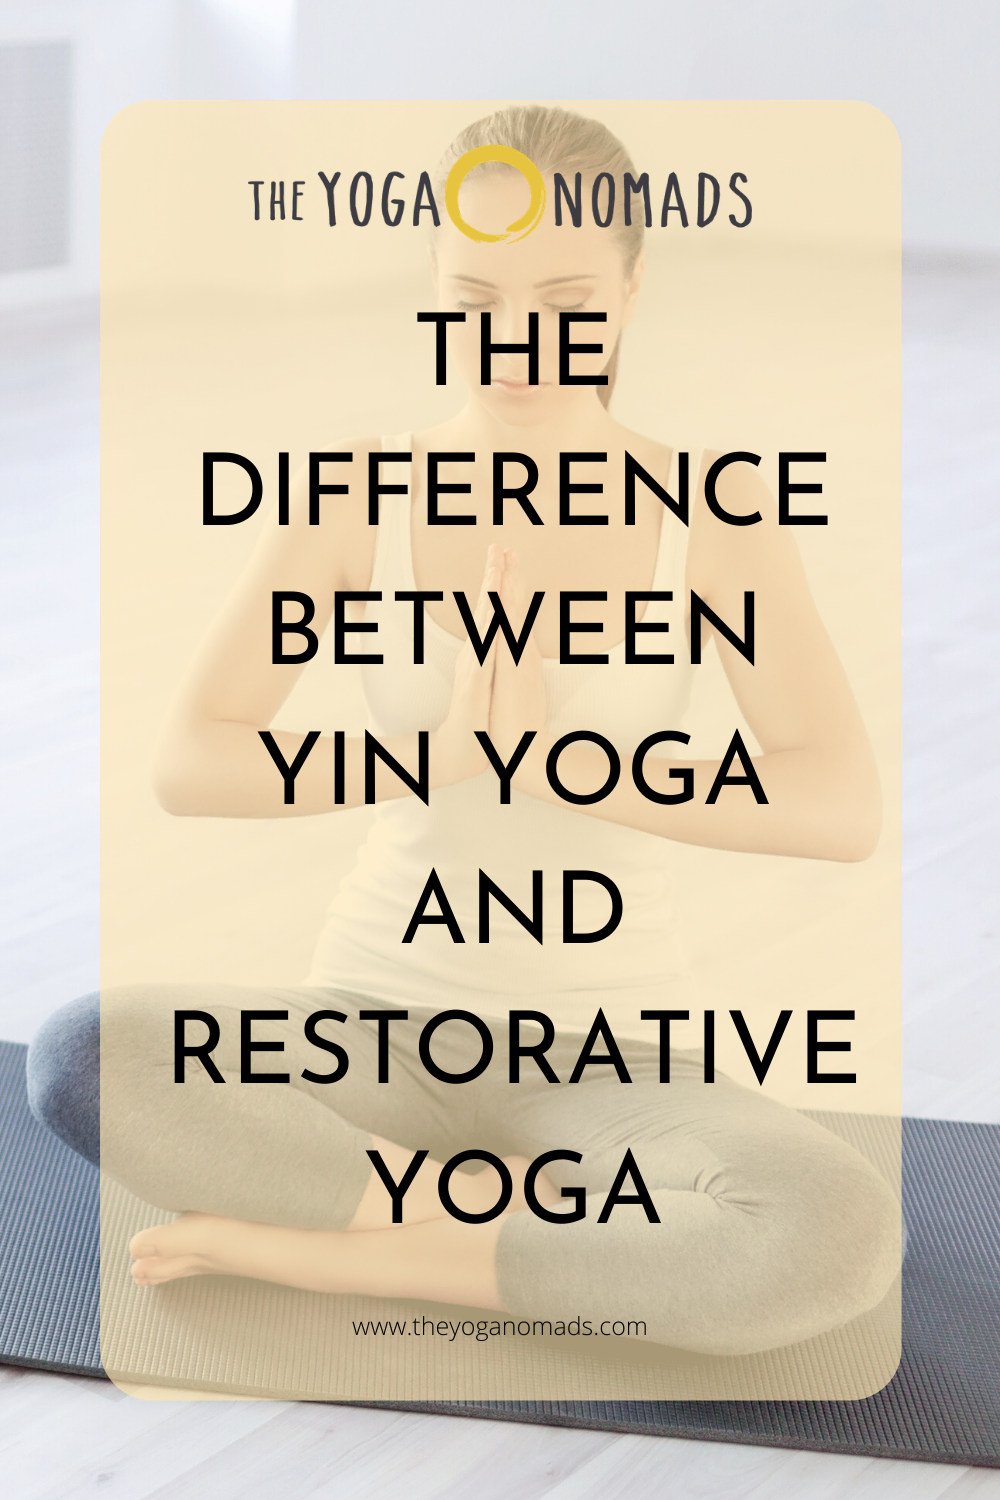 The Difference Between Yin Yoga and Restorative Yoga